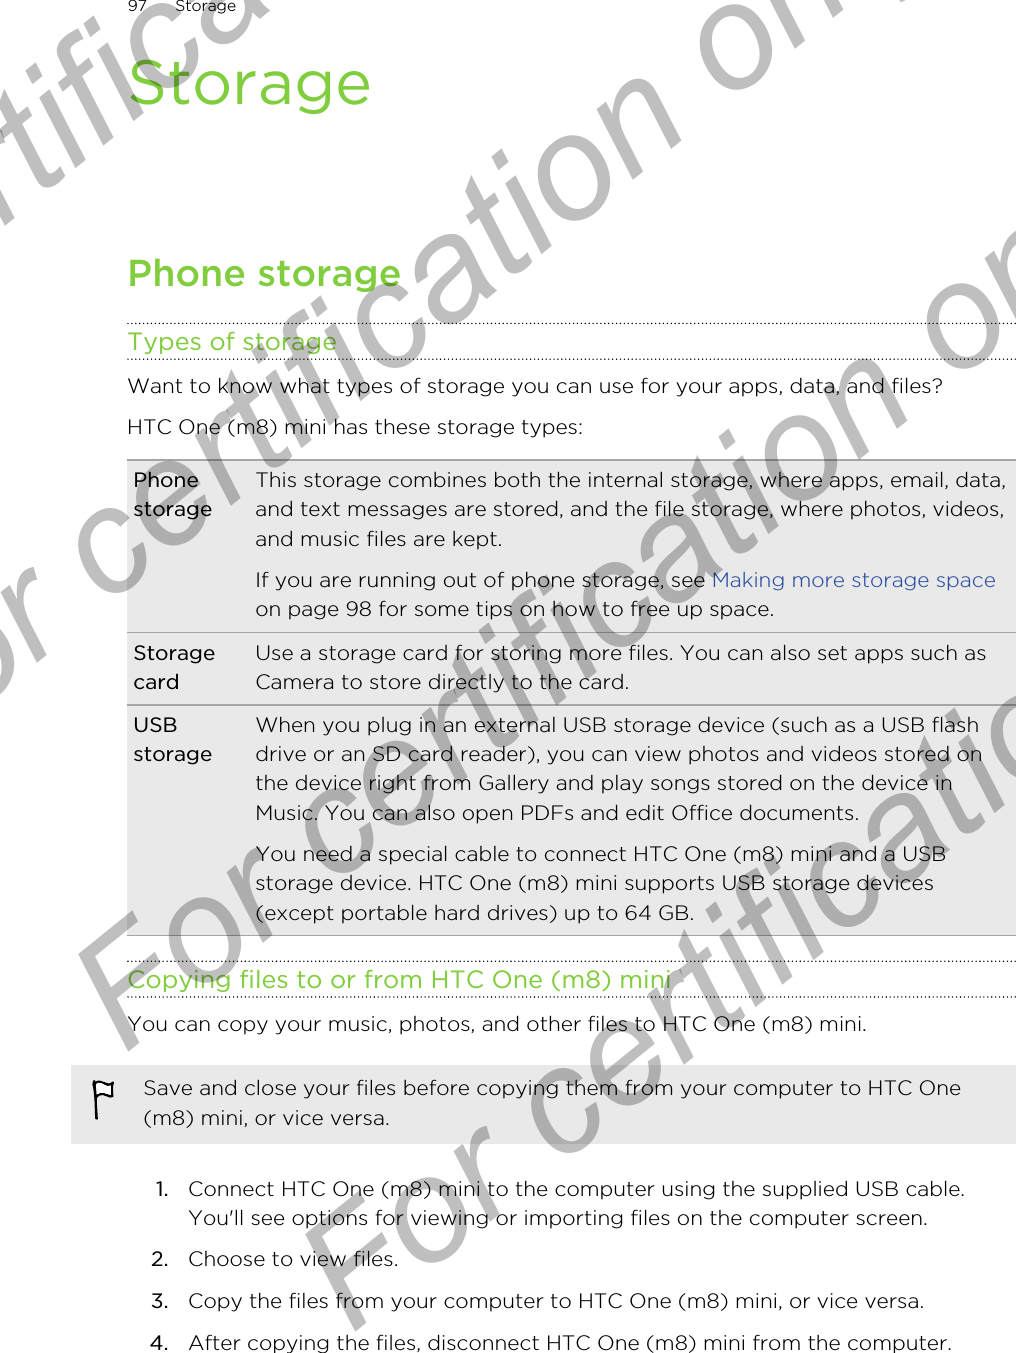 StoragePhone storageTypes of storageWant to know what types of storage you can use for your apps, data, and files?HTC One (m8) mini has these storage types:PhonestorageThis storage combines both the internal storage, where apps, email, data,and text messages are stored, and the file storage, where photos, videos,and music files are kept.If you are running out of phone storage, see Making more storage spaceon page 98 for some tips on how to free up space.StoragecardUse a storage card for storing more files. You can also set apps such asCamera to store directly to the card.USBstorageWhen you plug in an external USB storage device (such as a USB flashdrive or an SD card reader), you can view photos and videos stored onthe device right from Gallery and play songs stored on the device inMusic. You can also open PDFs and edit Office documents.You need a special cable to connect HTC One (m8) mini and a USBstorage device. HTC One (m8) mini supports USB storage devices(except portable hard drives) up to 64 GB.Copying files to or from HTC One (m8) miniYou can copy your music, photos, and other files to HTC One (m8) mini.Save and close your files before copying them from your computer to HTC One(m8) mini, or vice versa.1. Connect HTC One (m8) mini to the computer using the supplied USB cable.You&apos;ll see options for viewing or importing files on the computer screen.2. Choose to view files.3. Copy the files from your computer to HTC One (m8) mini, or vice versa.4. After copying the files, disconnect HTC One (m8) mini from the computer.97 StorageFor certification  For certification only  For certification only  For certification only 